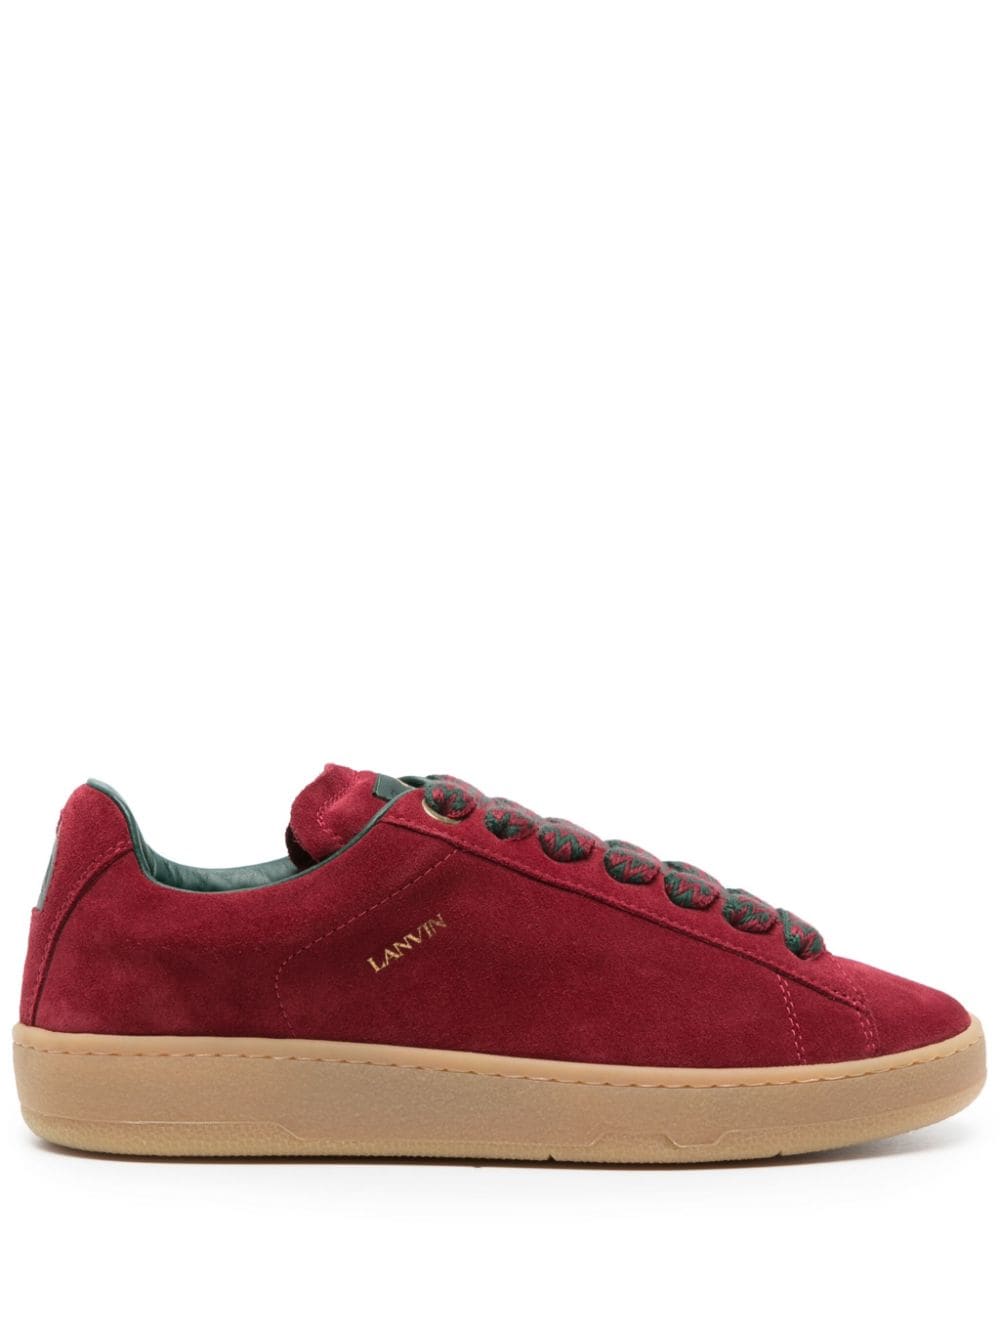 Image 1 of Lanvin Lite Curb suede sneakers